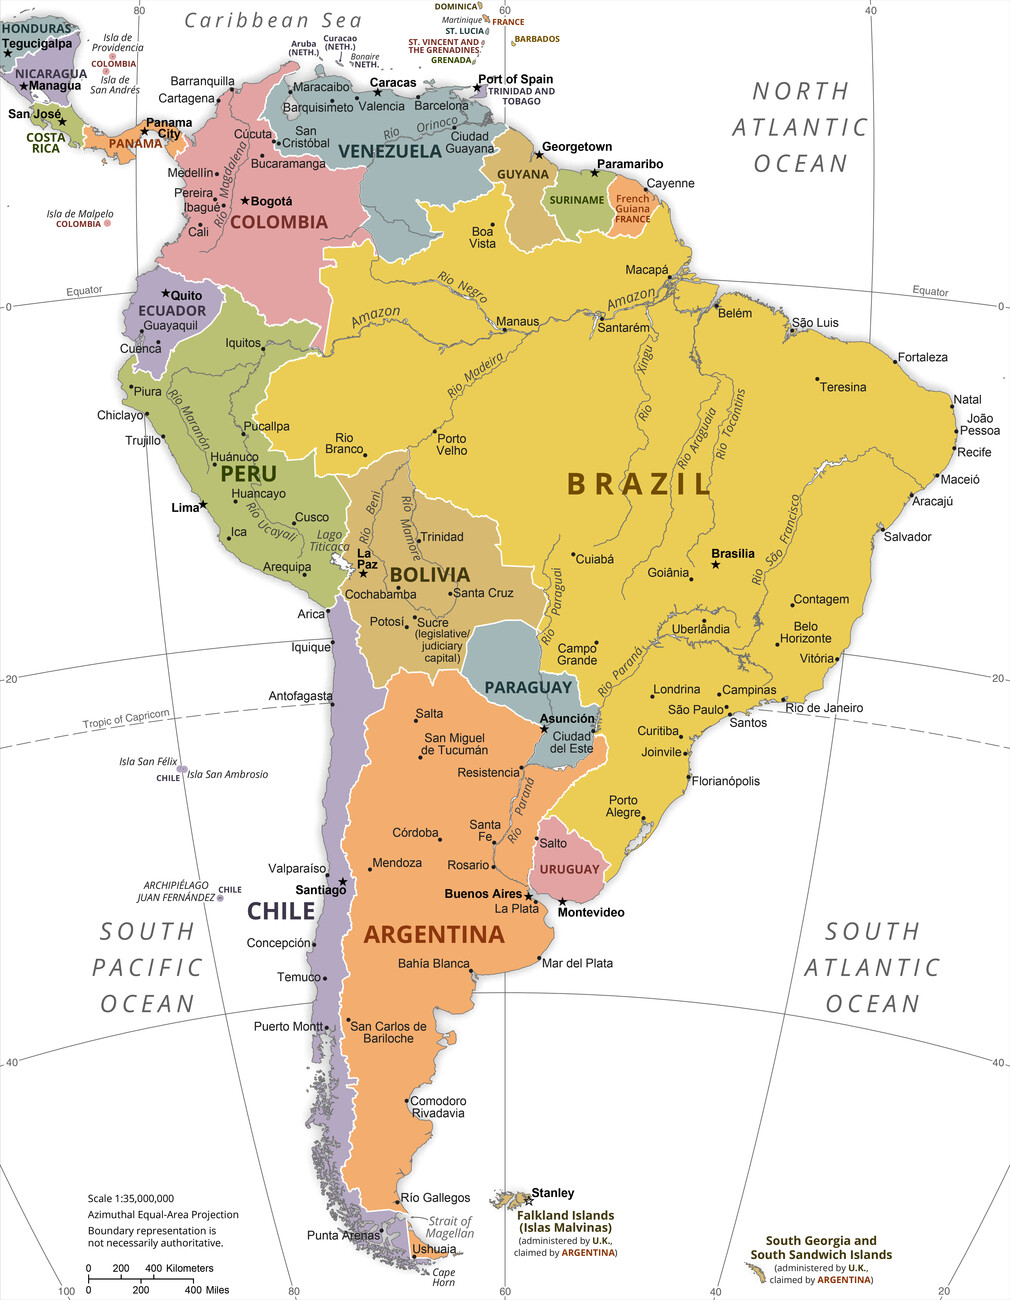 South America Political Map Wall Mural. Buy online at Abposters.com